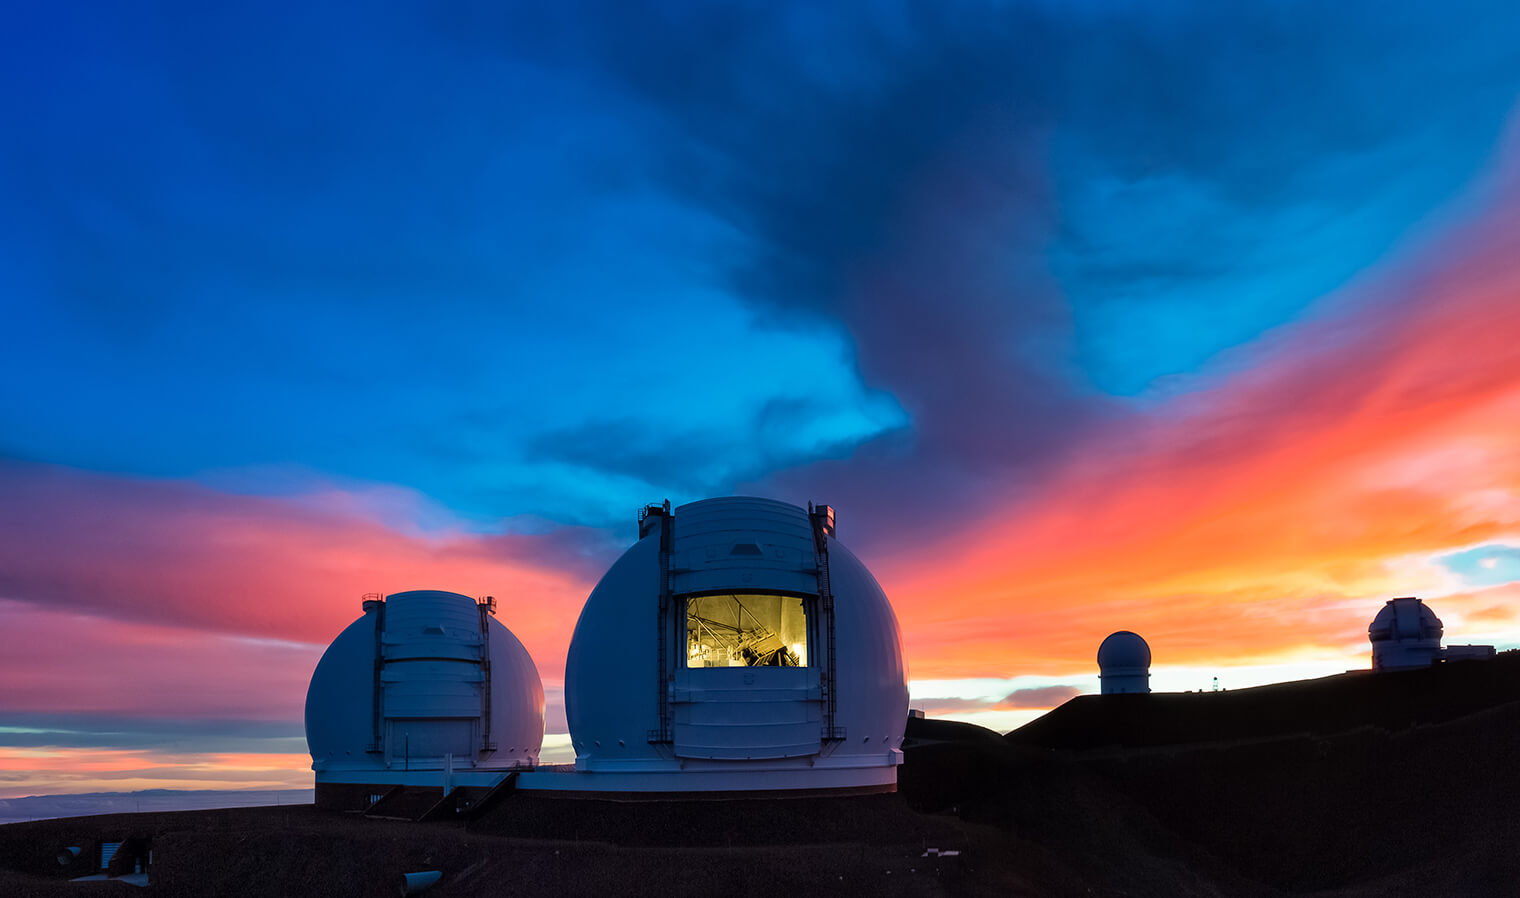 Keck Observatory at sunrise on top of the Maunakea mountain summit in Hawaii